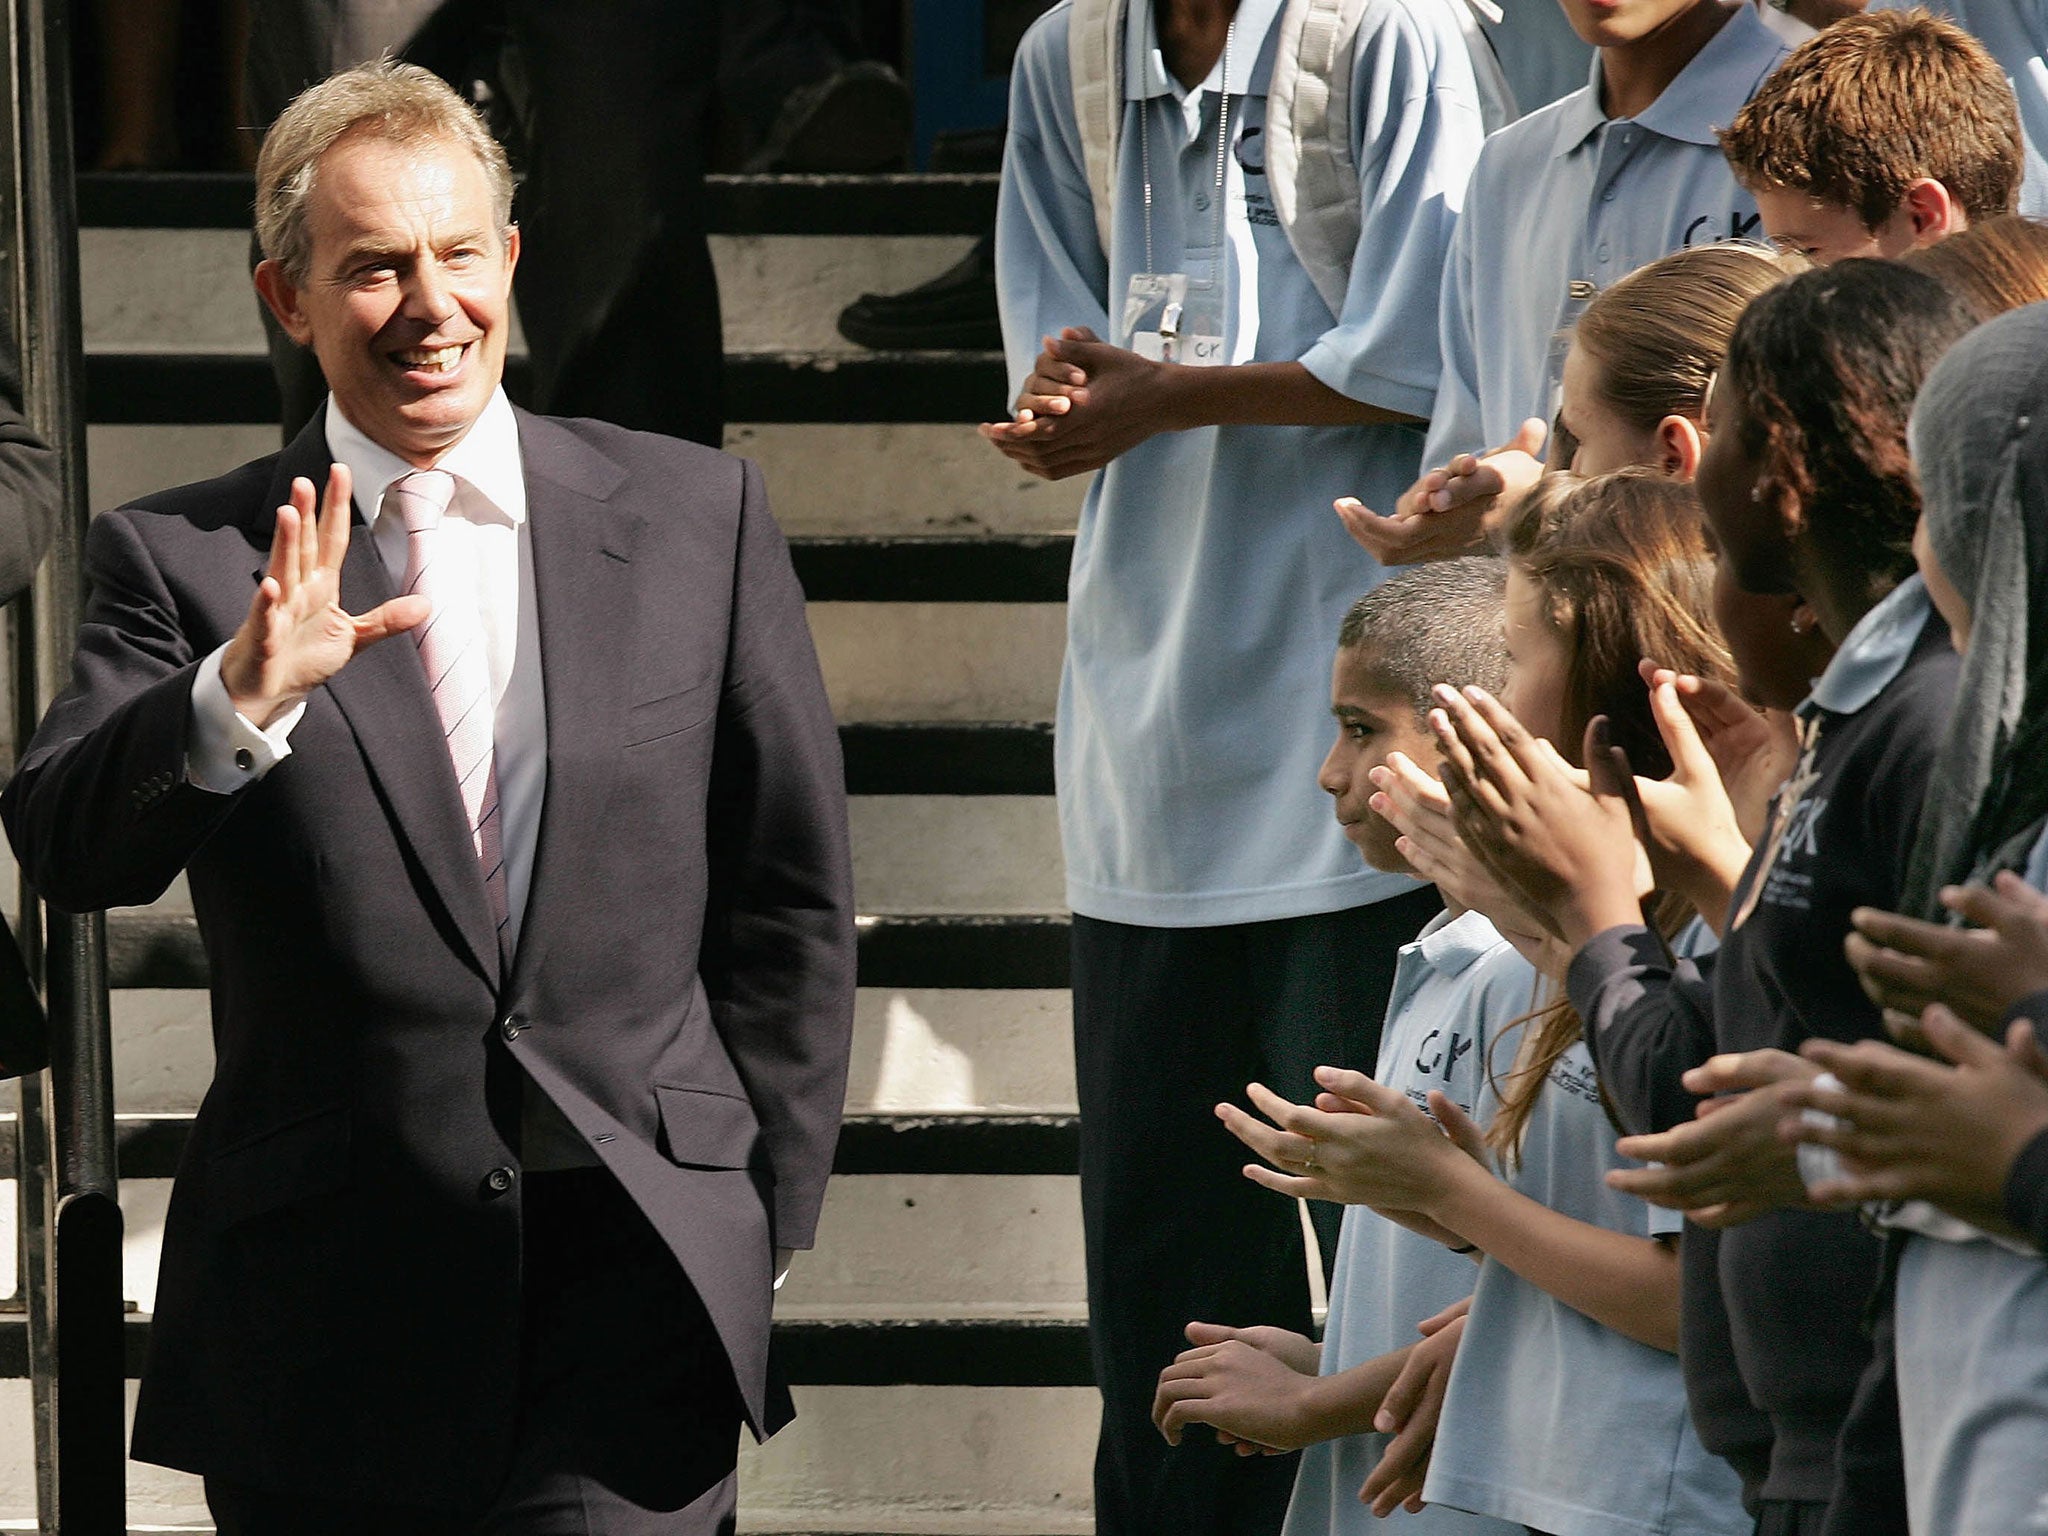 Tony Blair waves at students during his visit to Quintin Kynaston School on September 7, 2006, when he announced his resignation